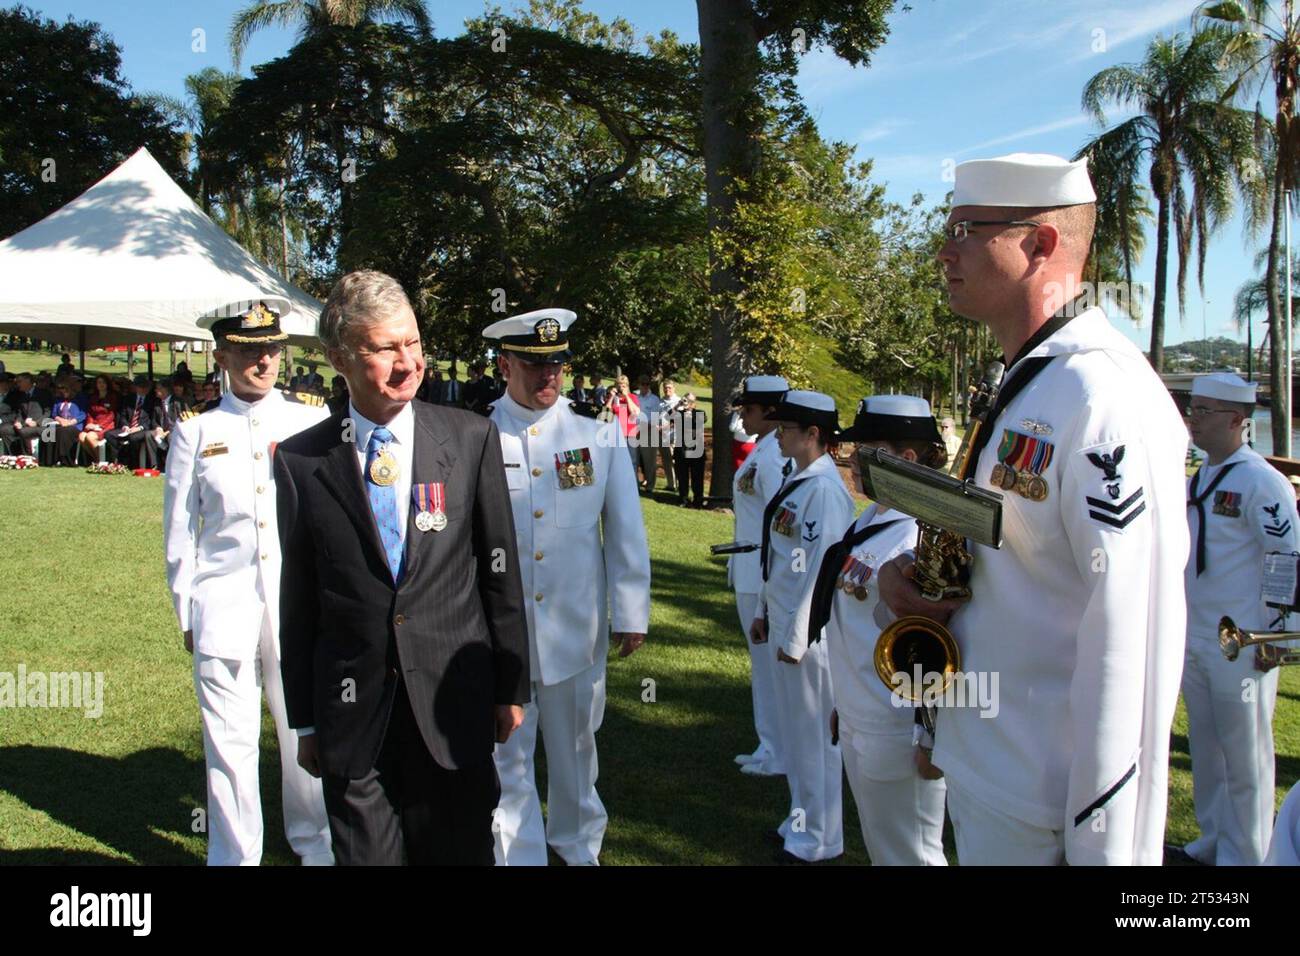 1105071X994-001 BRISBANE, Australia (May 7, 2011) Members of the U.S. 7th Fleet Band are inspected by acting Governor and Chief Justice of Queensland the Honorable Paul de Jersey, AC, in a Coral Sea Memorial Service at Newstead Park. The band is in Australia to commemorate the 69th anniversary of the Battle of the Coral Sea and to share music with the community in the wake of the recent floods. (U.S. Navy Stock Photo